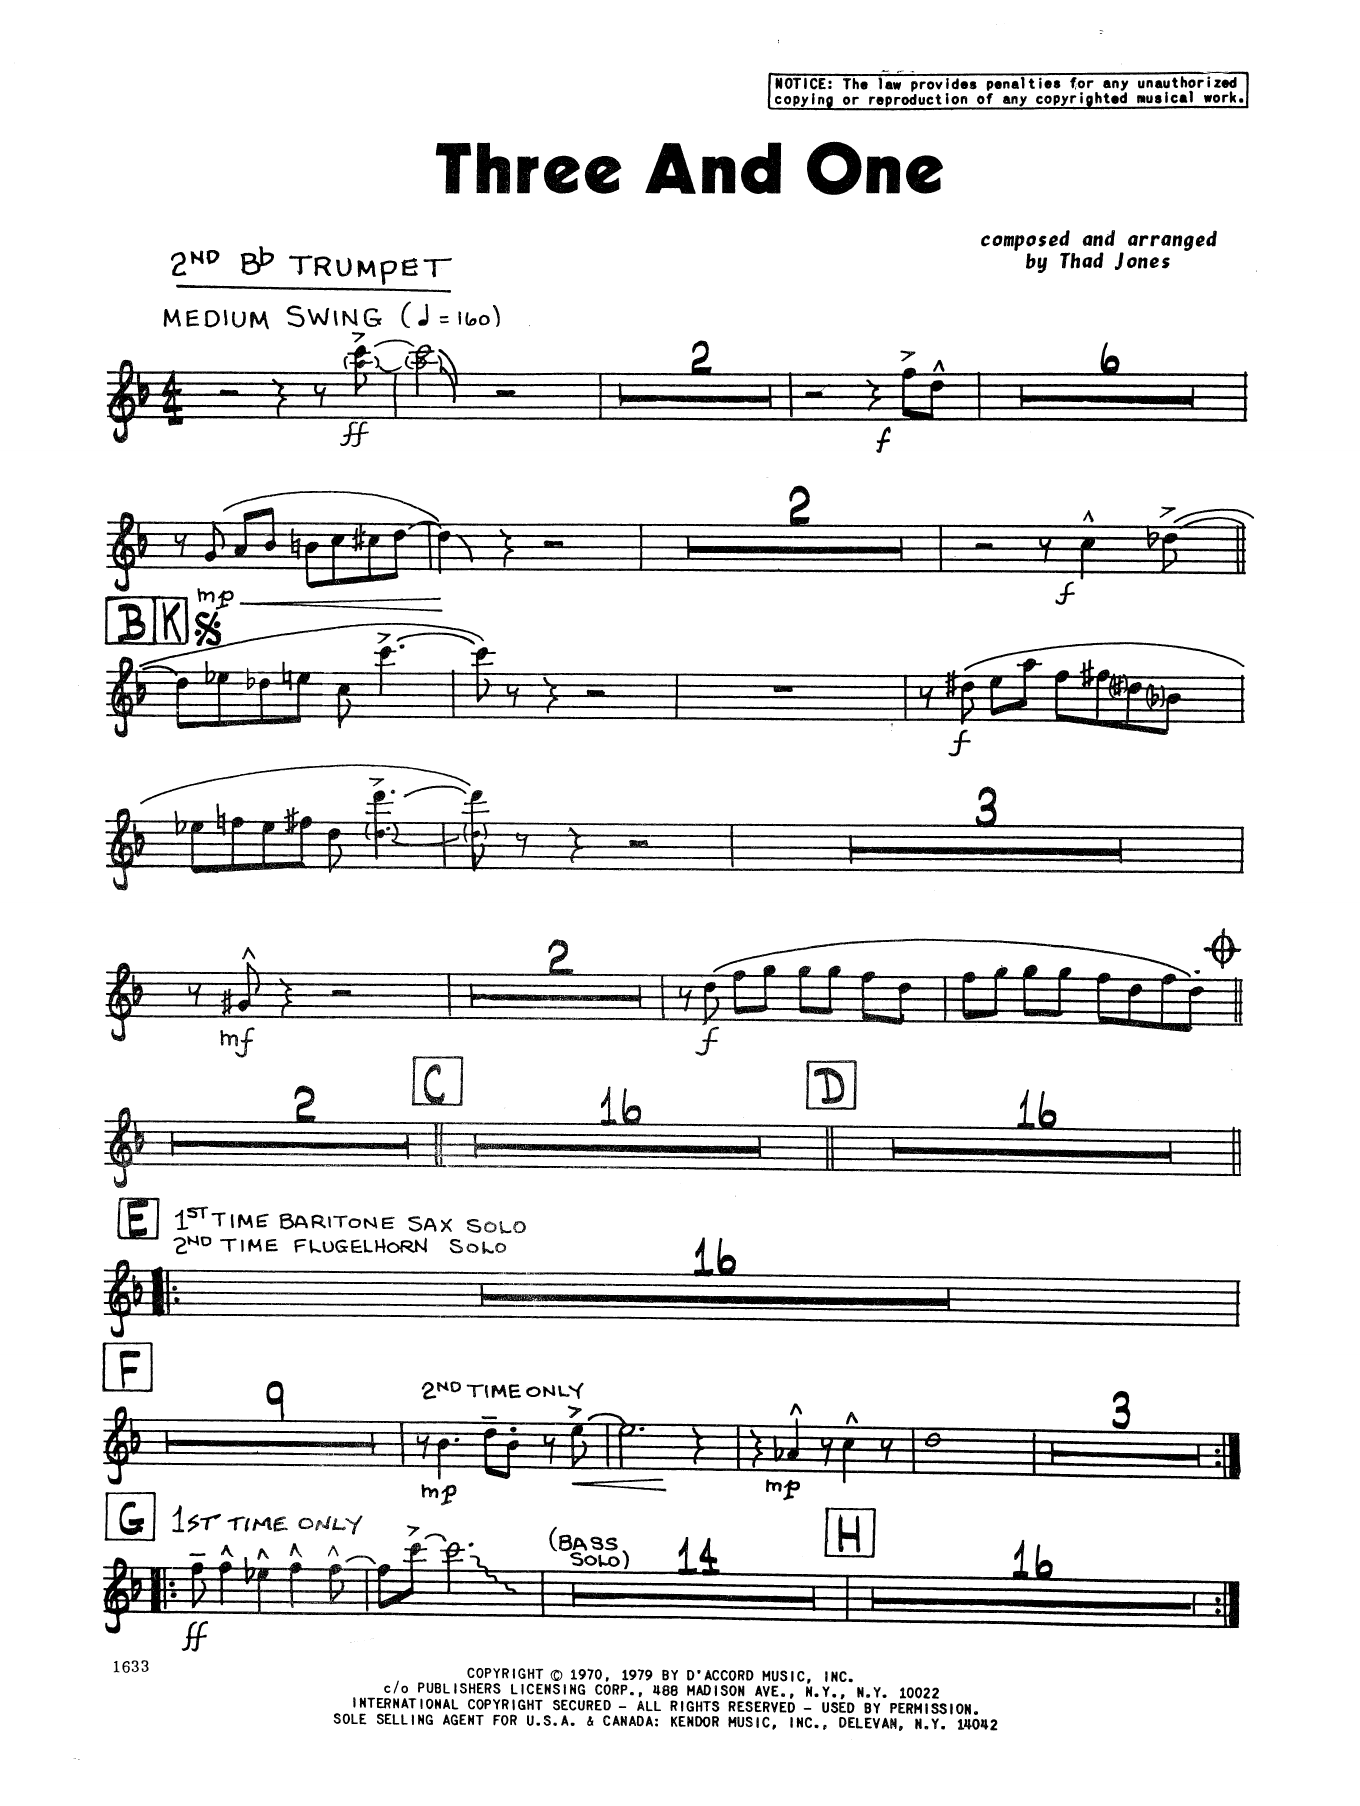 Thad Jones Three And One - 2nd Bb Trumpet sheet music preview music notes and score for Jazz Ensemble including 2 page(s)